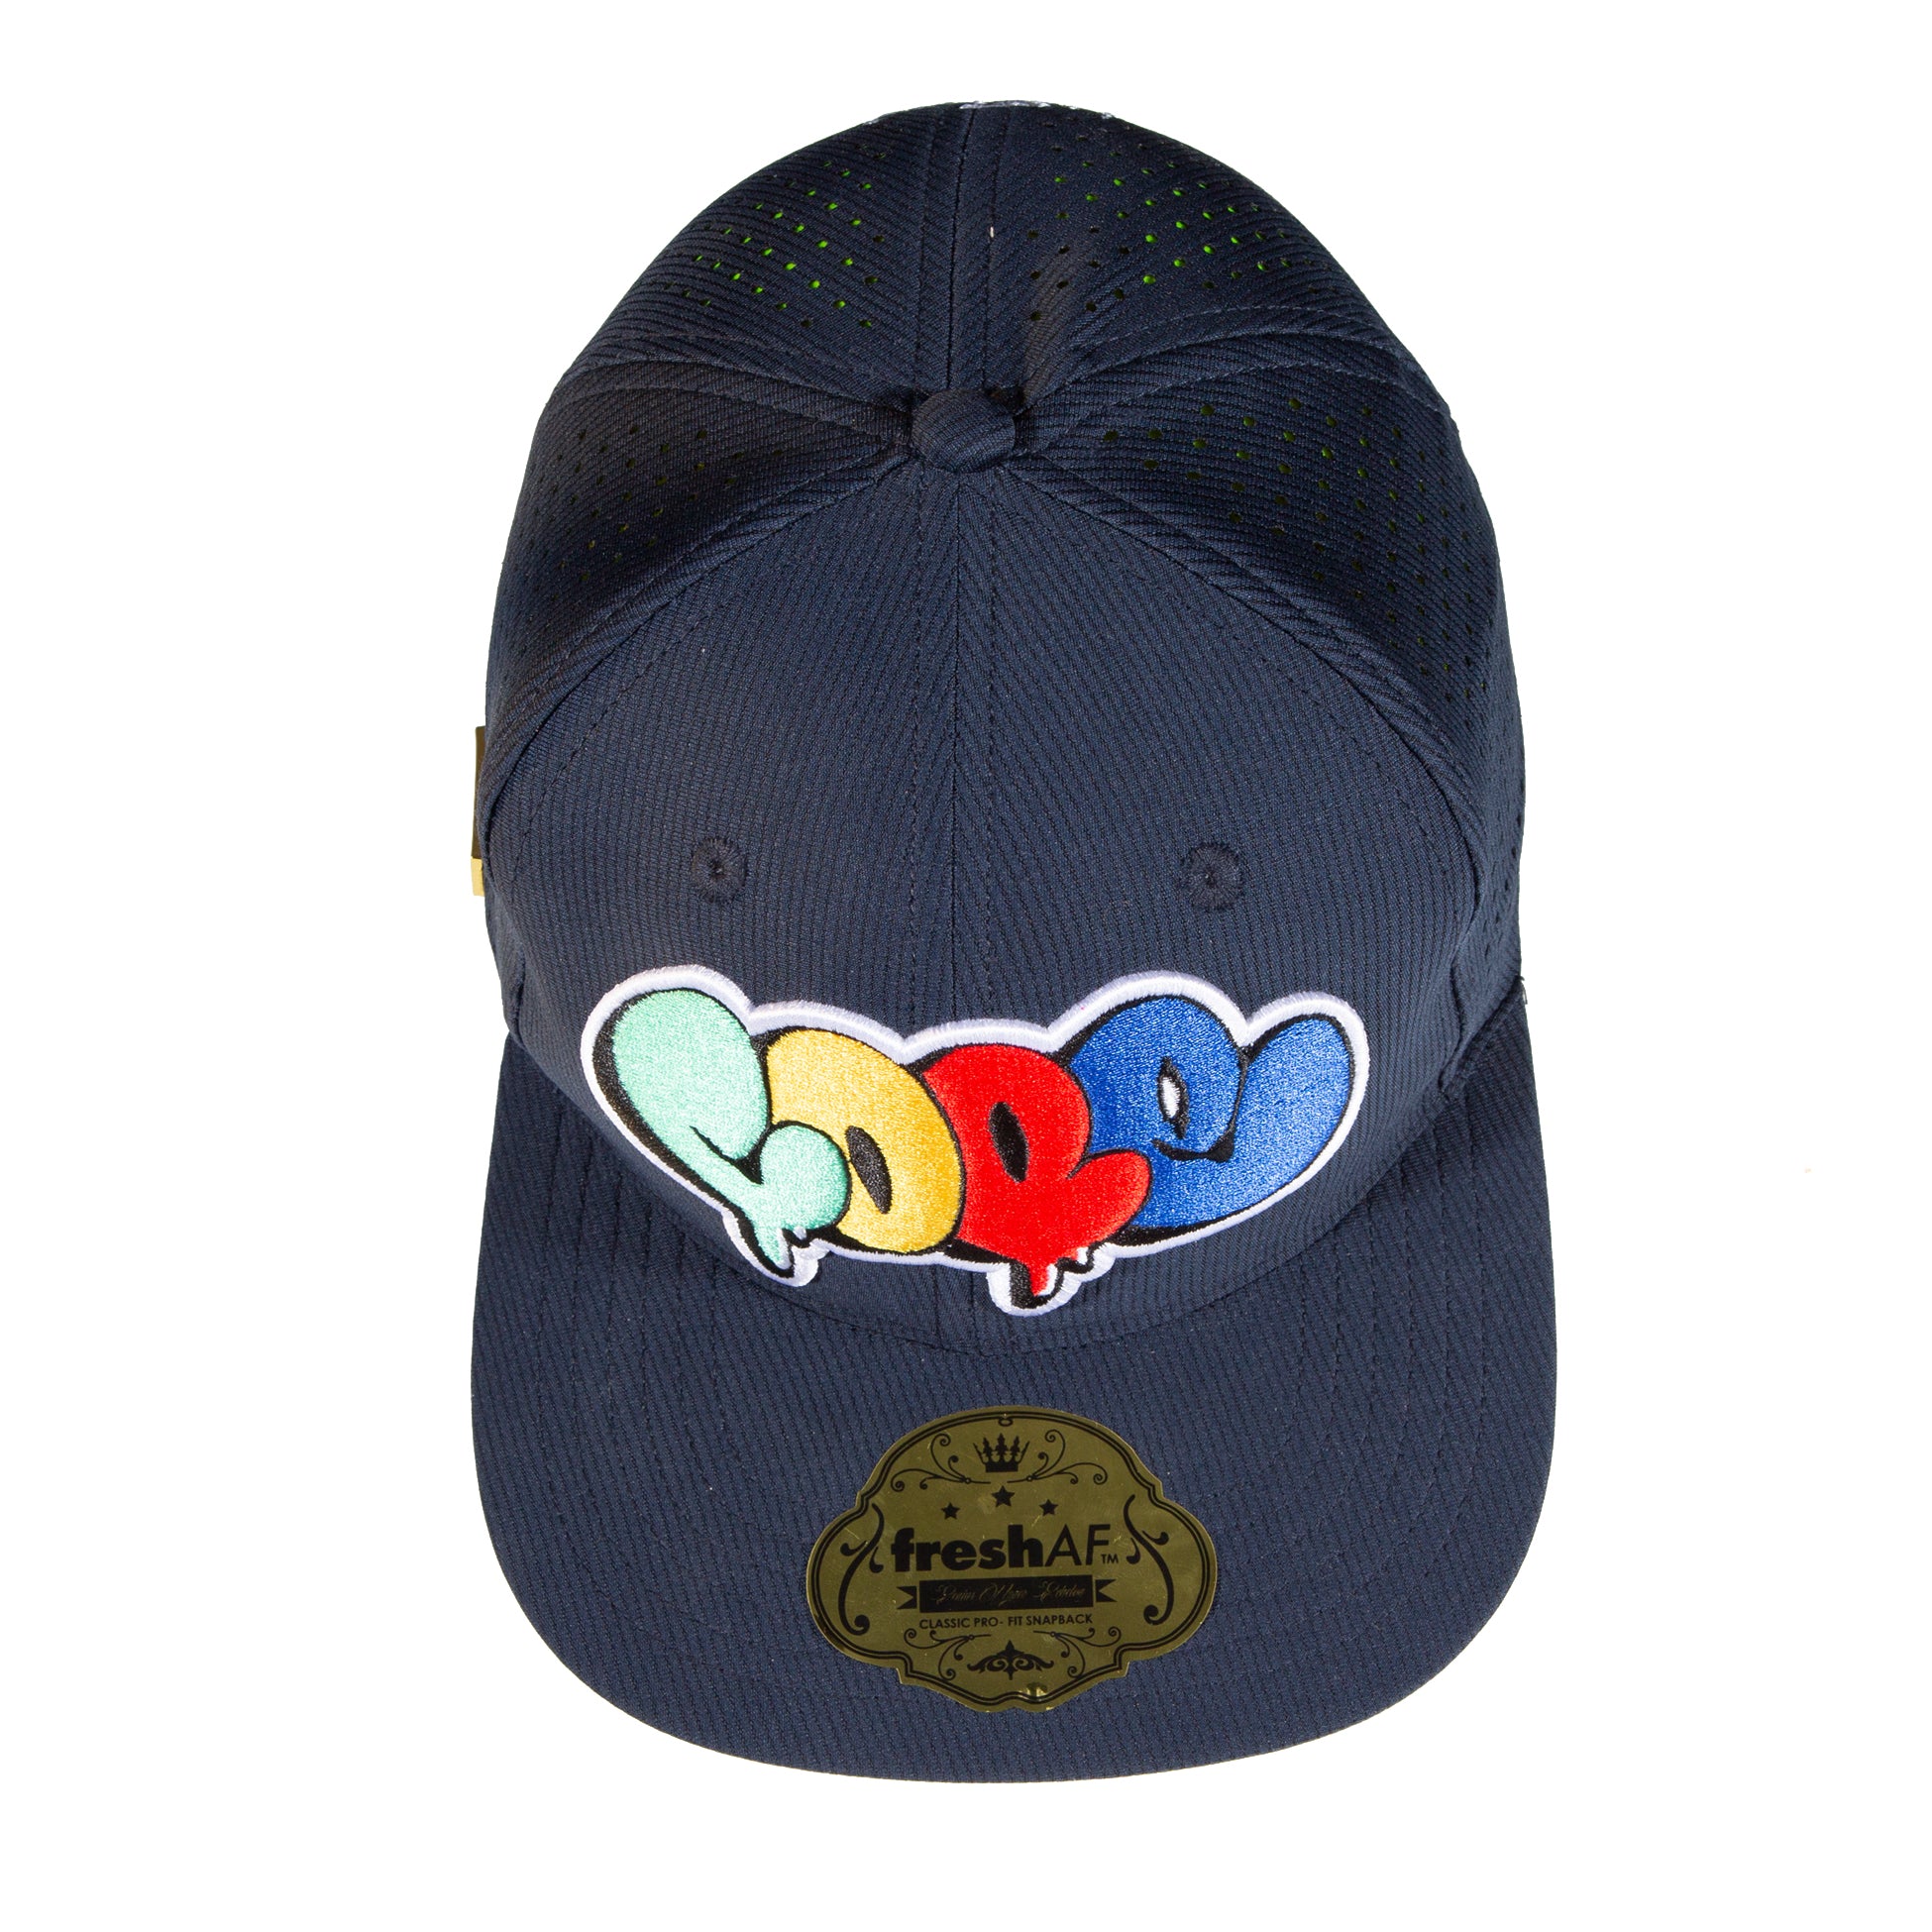 COPE 2- Nylon Mesh Cap - 3D Embroidery - Navy/Mutil-color – Fresh AF Brand